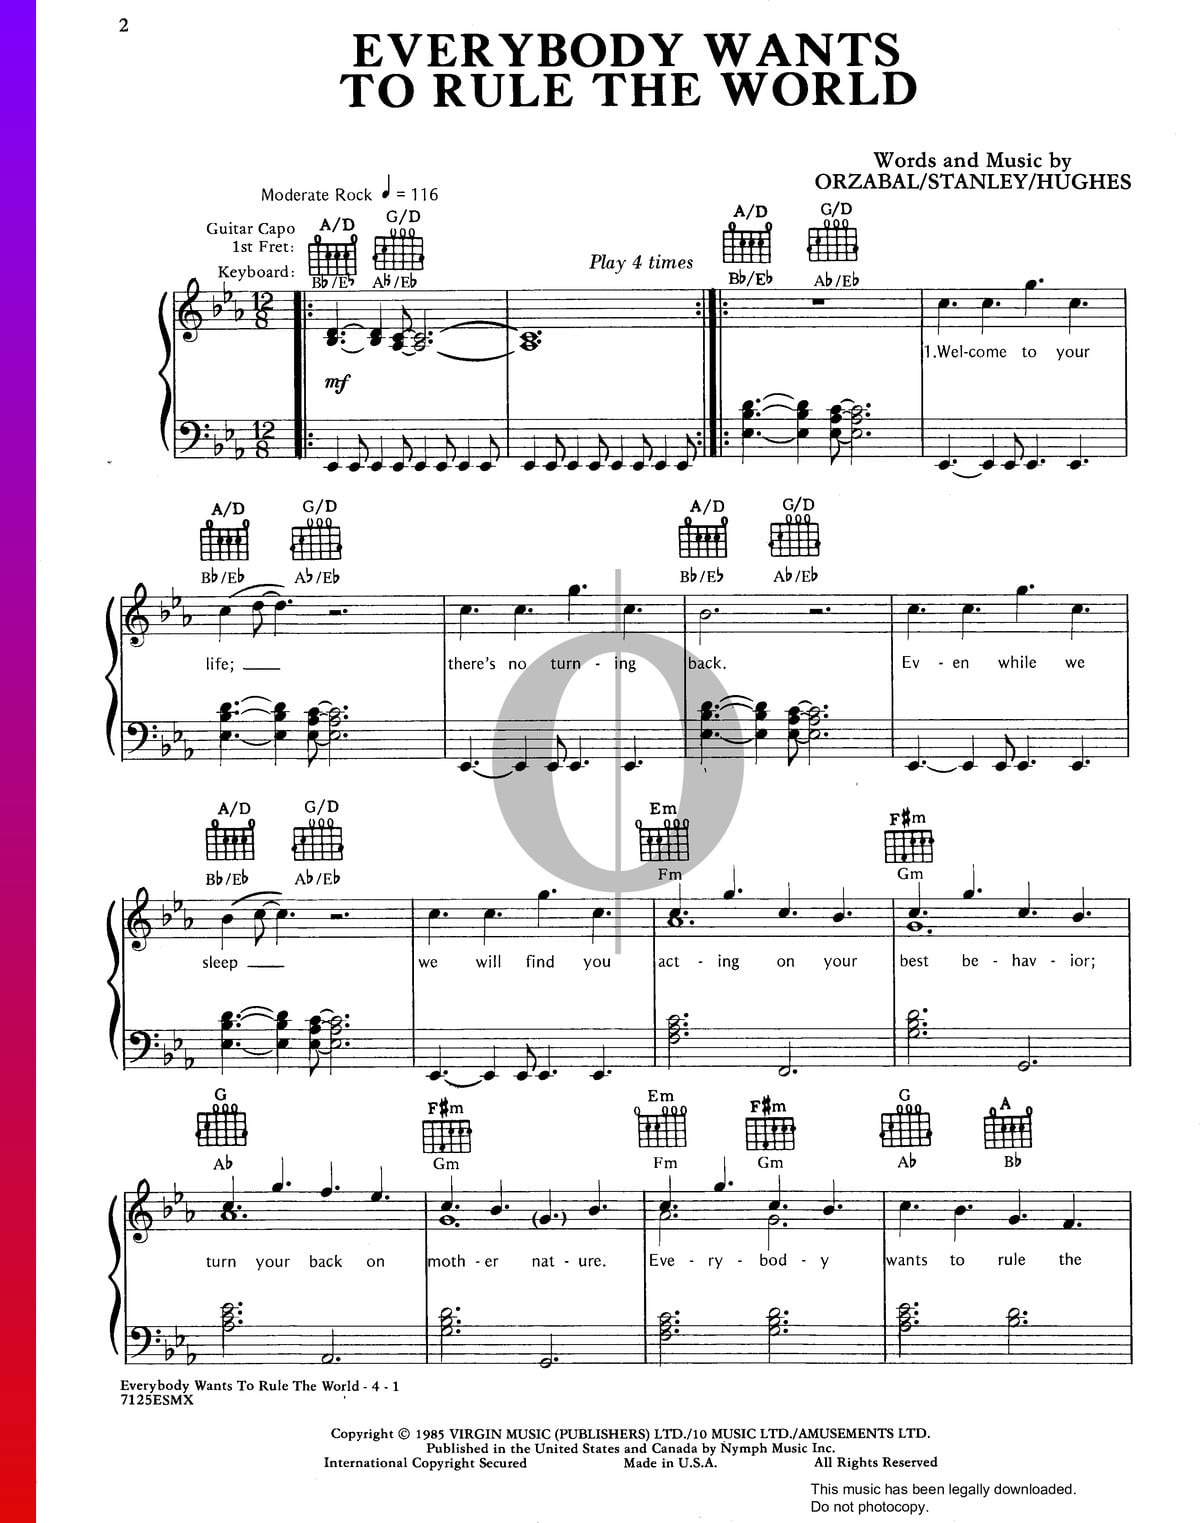 Everybody Wants To Rule The World Sheet Music (Piano, Guitar, Voice